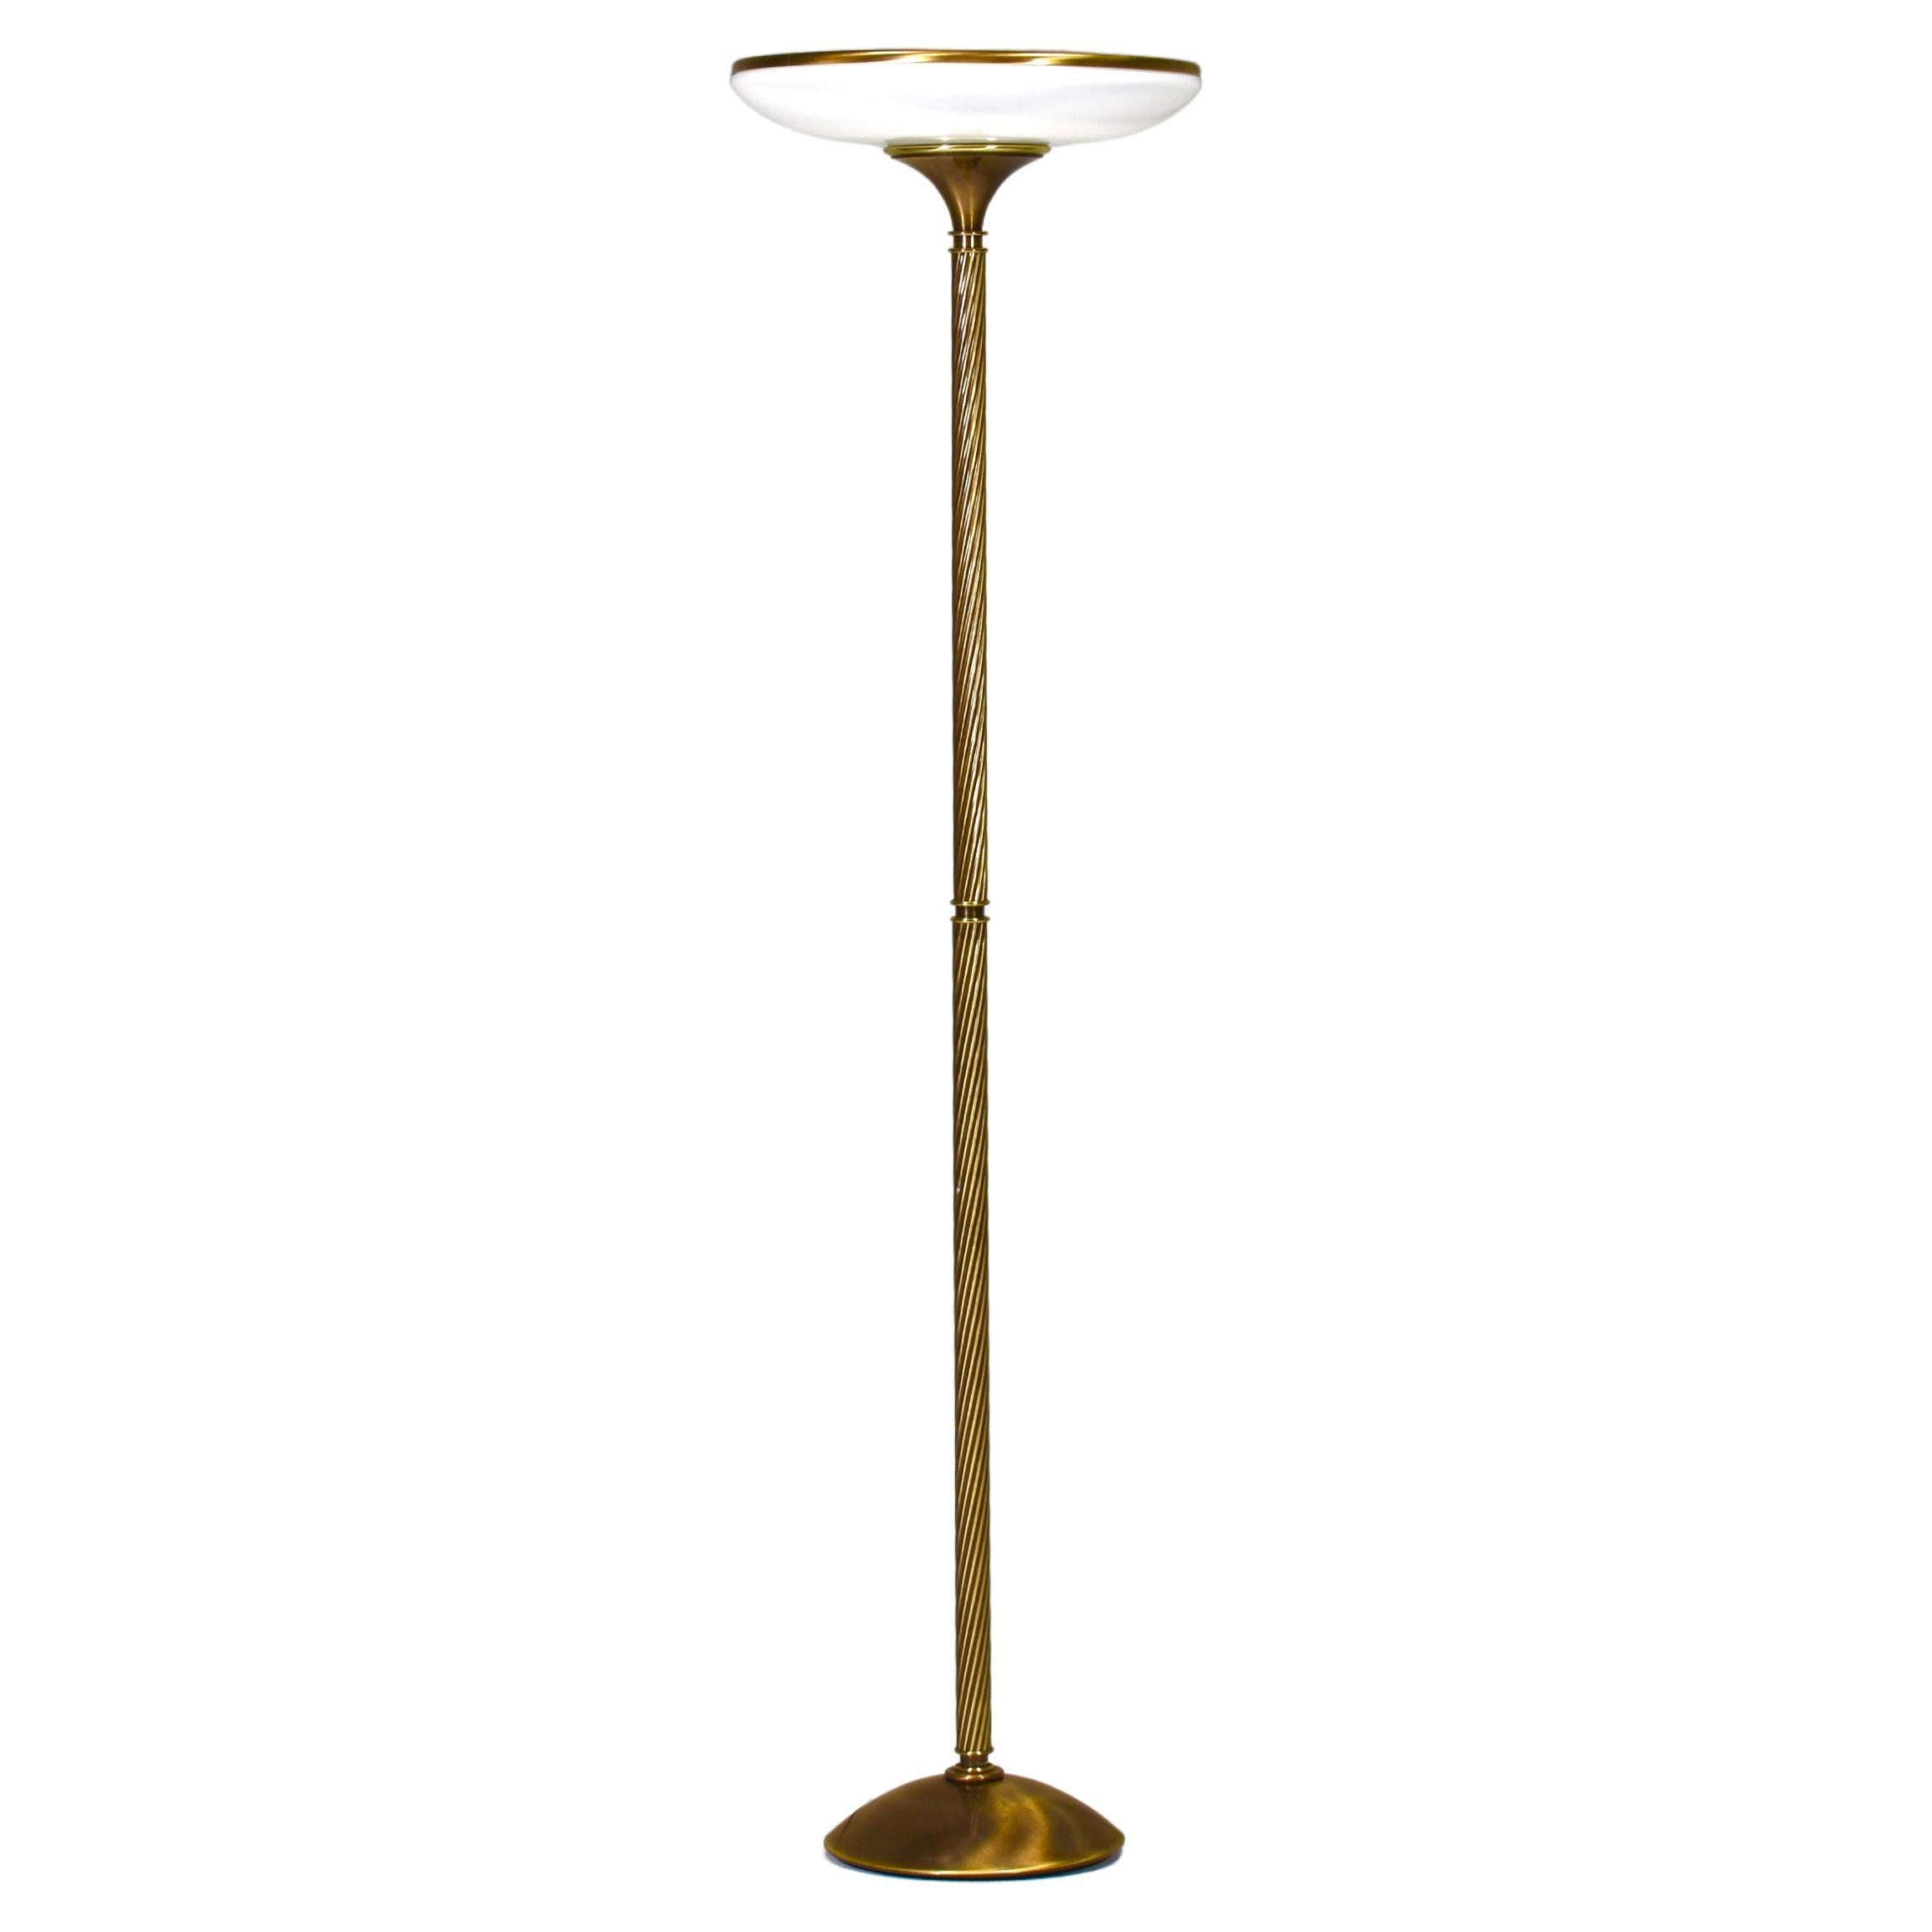 Relco Milano Turned Brass and Opaline Glass Floor Lamp, Italy - circa 1970 For Sale